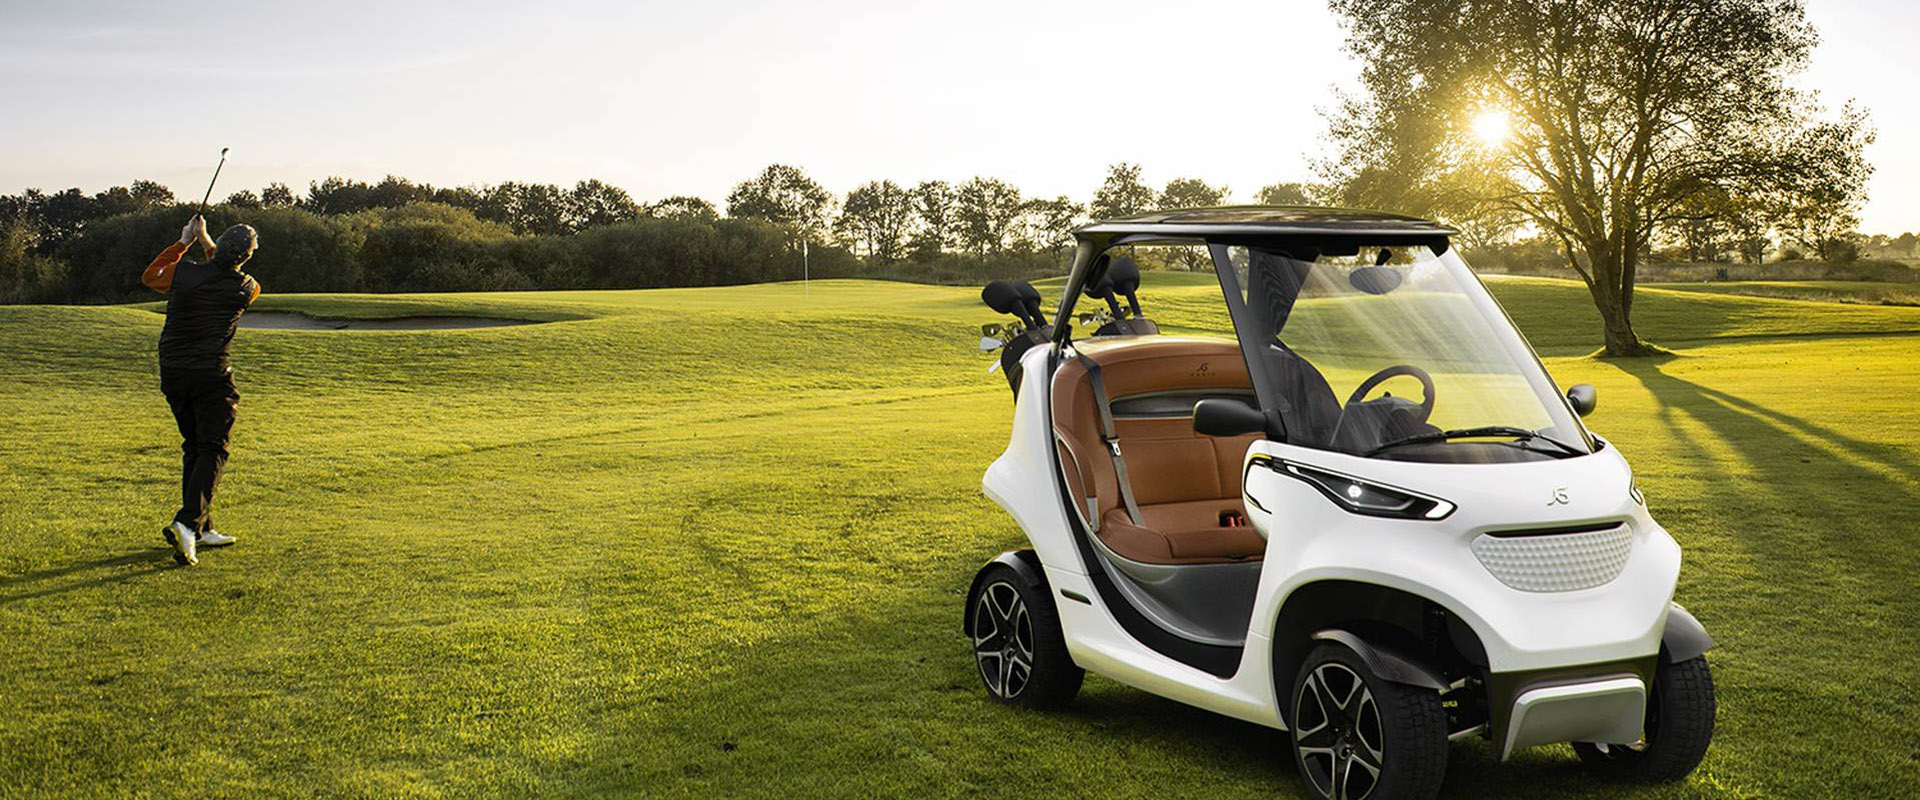 How To Prolong The Life Of Your Golf Cart Battery?